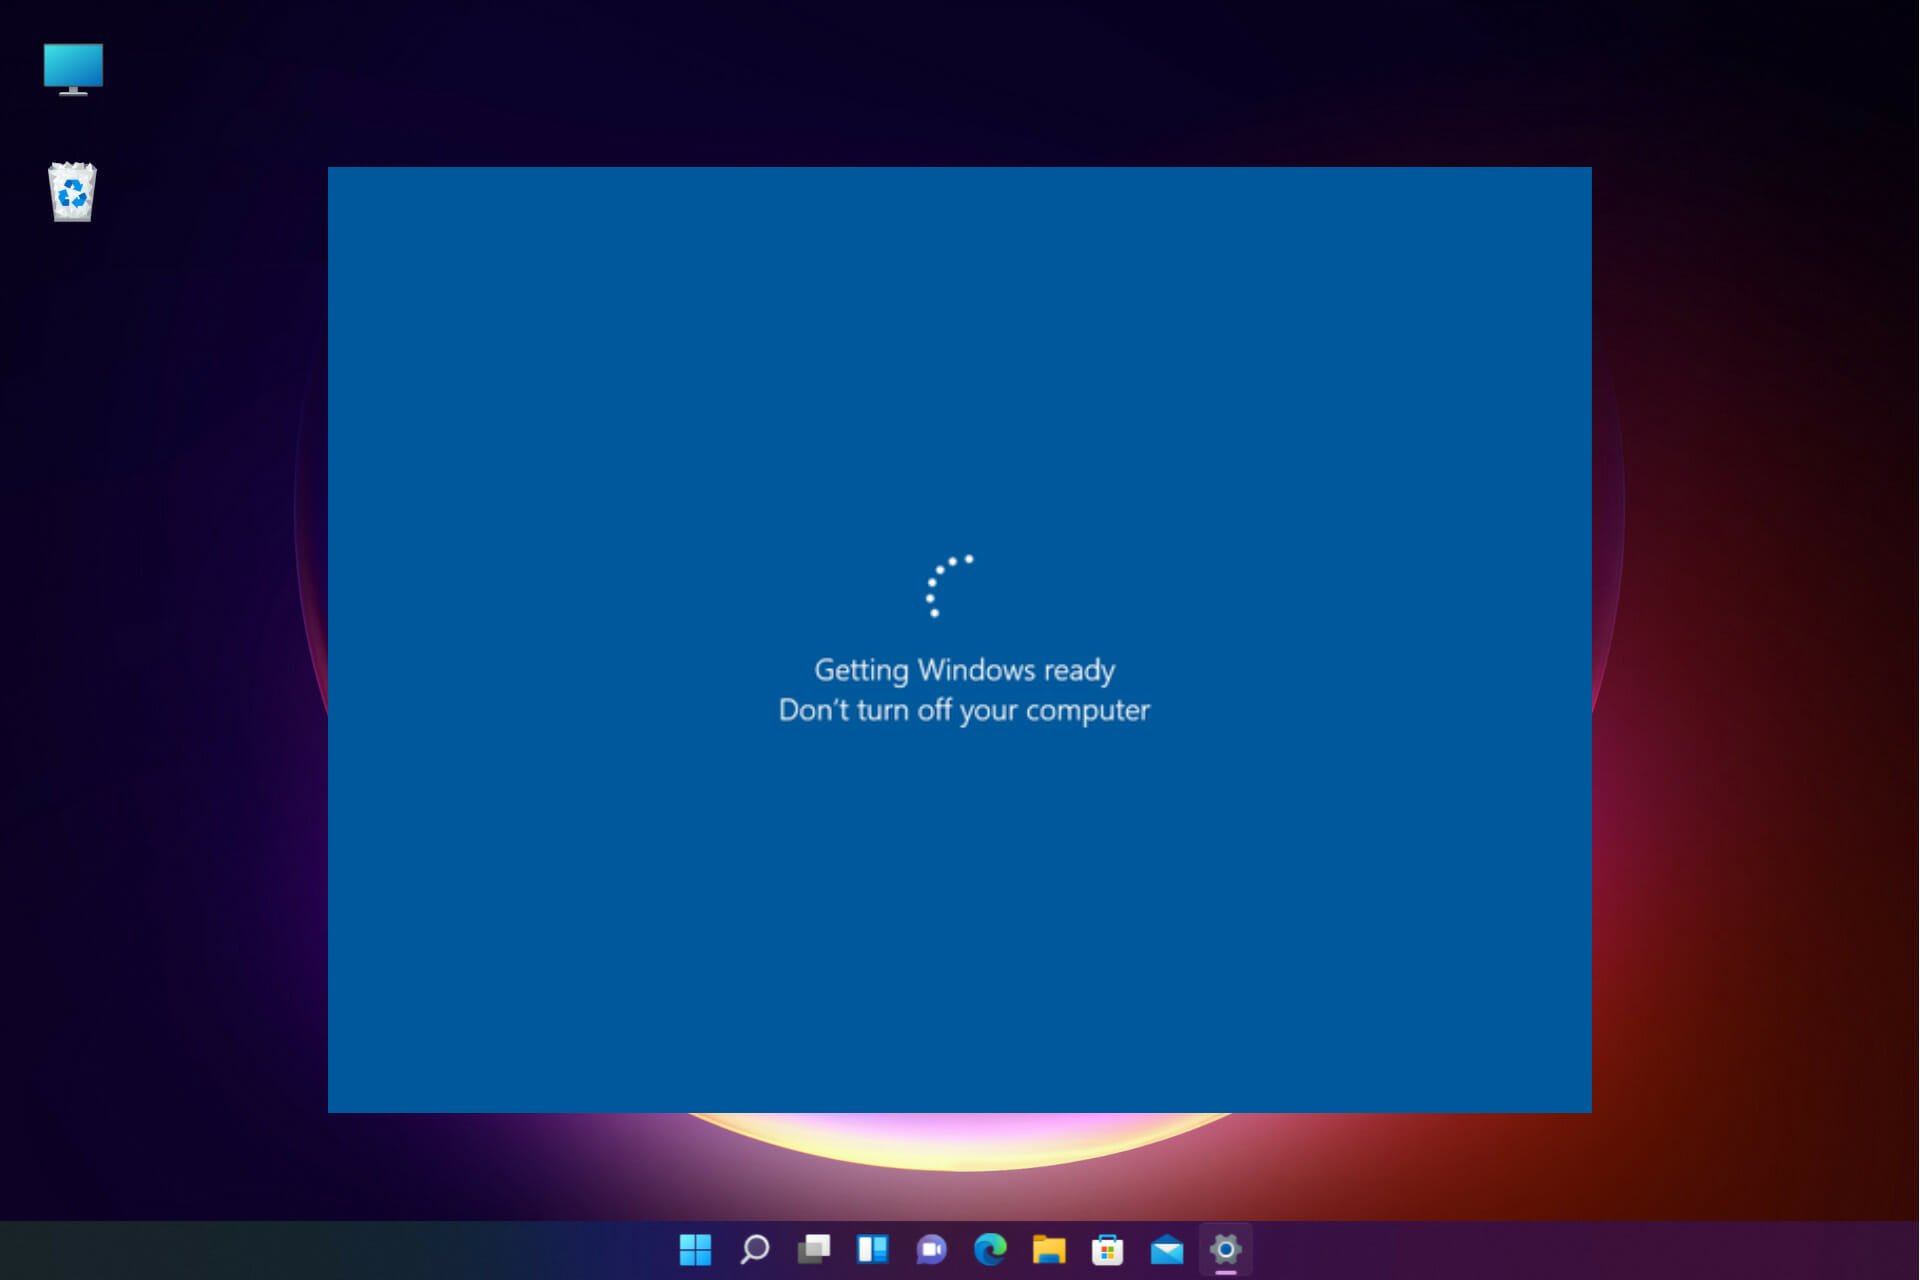 Getting Windows ready. Don't turn off your computer stuck